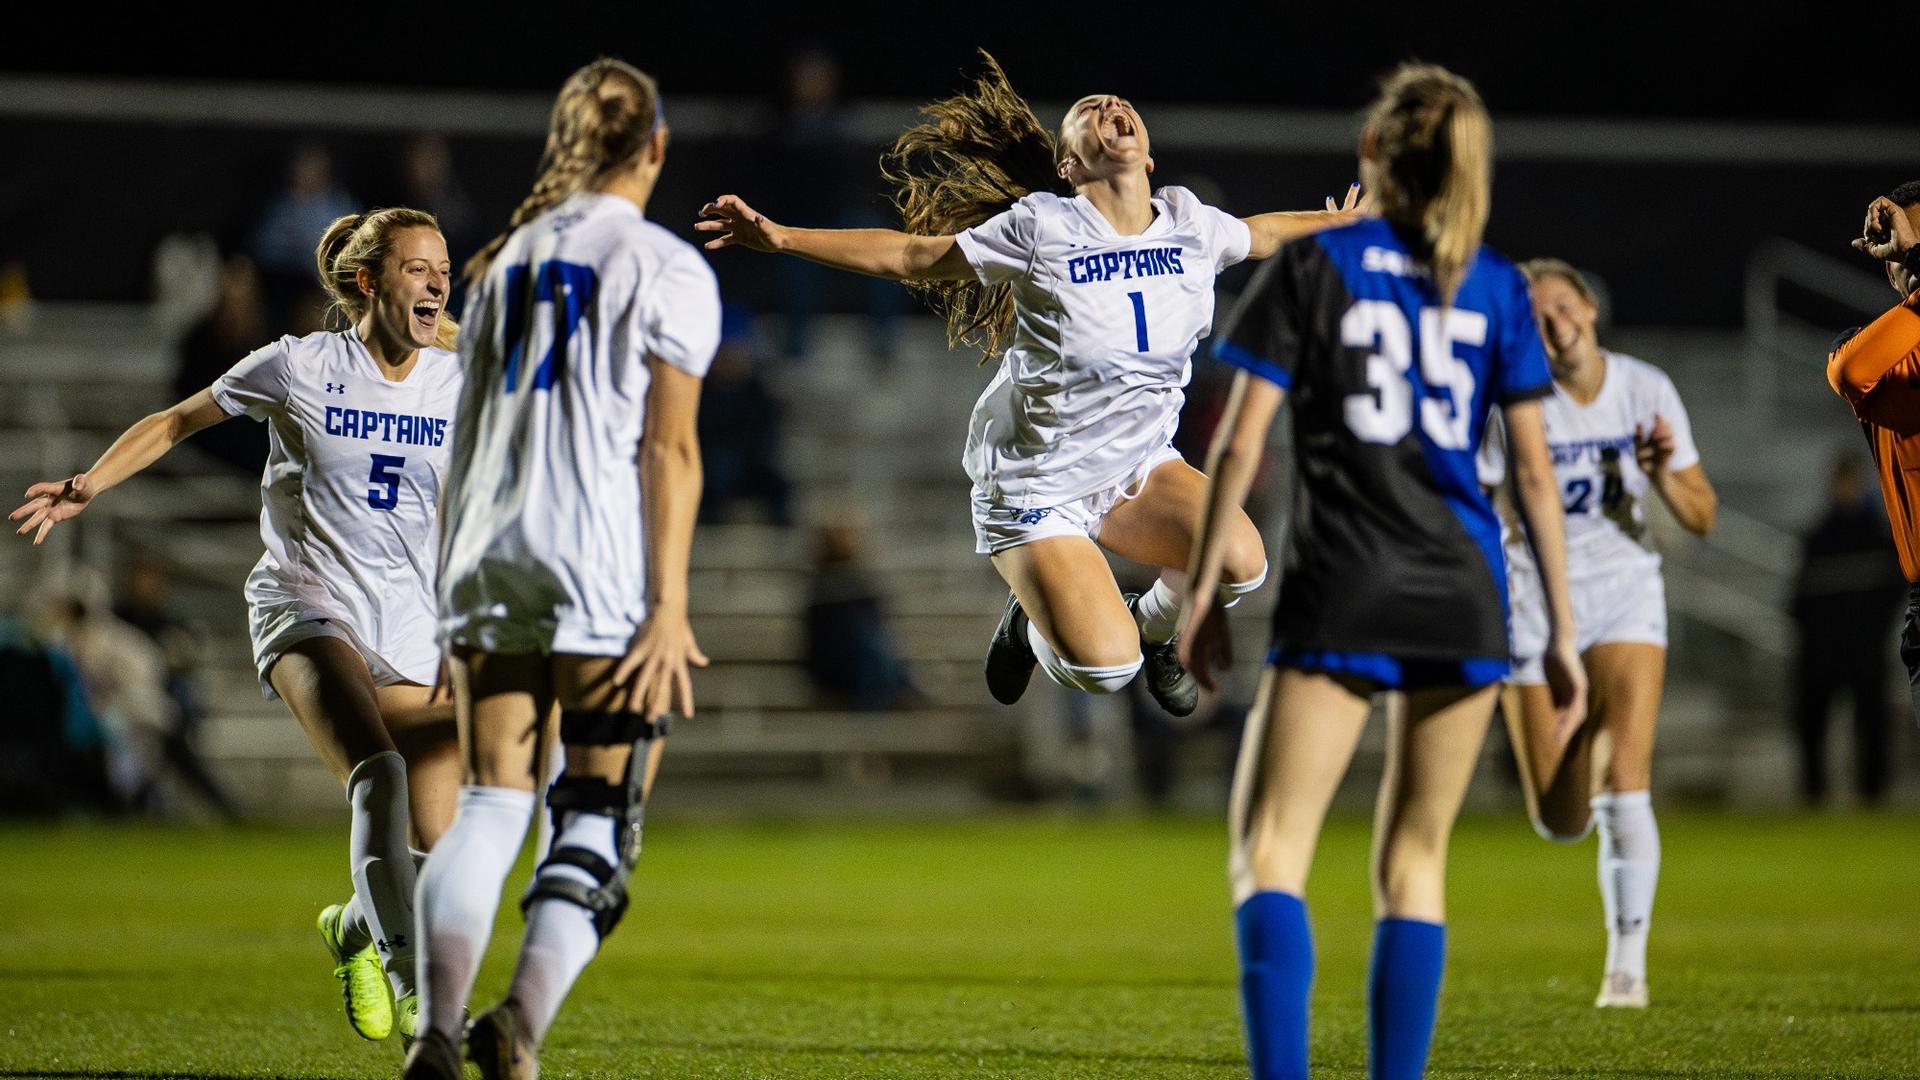 No. 1 Christopher Newport Erupts for Six Second-Half Goals to Capture 7-0 Win Over Marymount in NCAA First Round